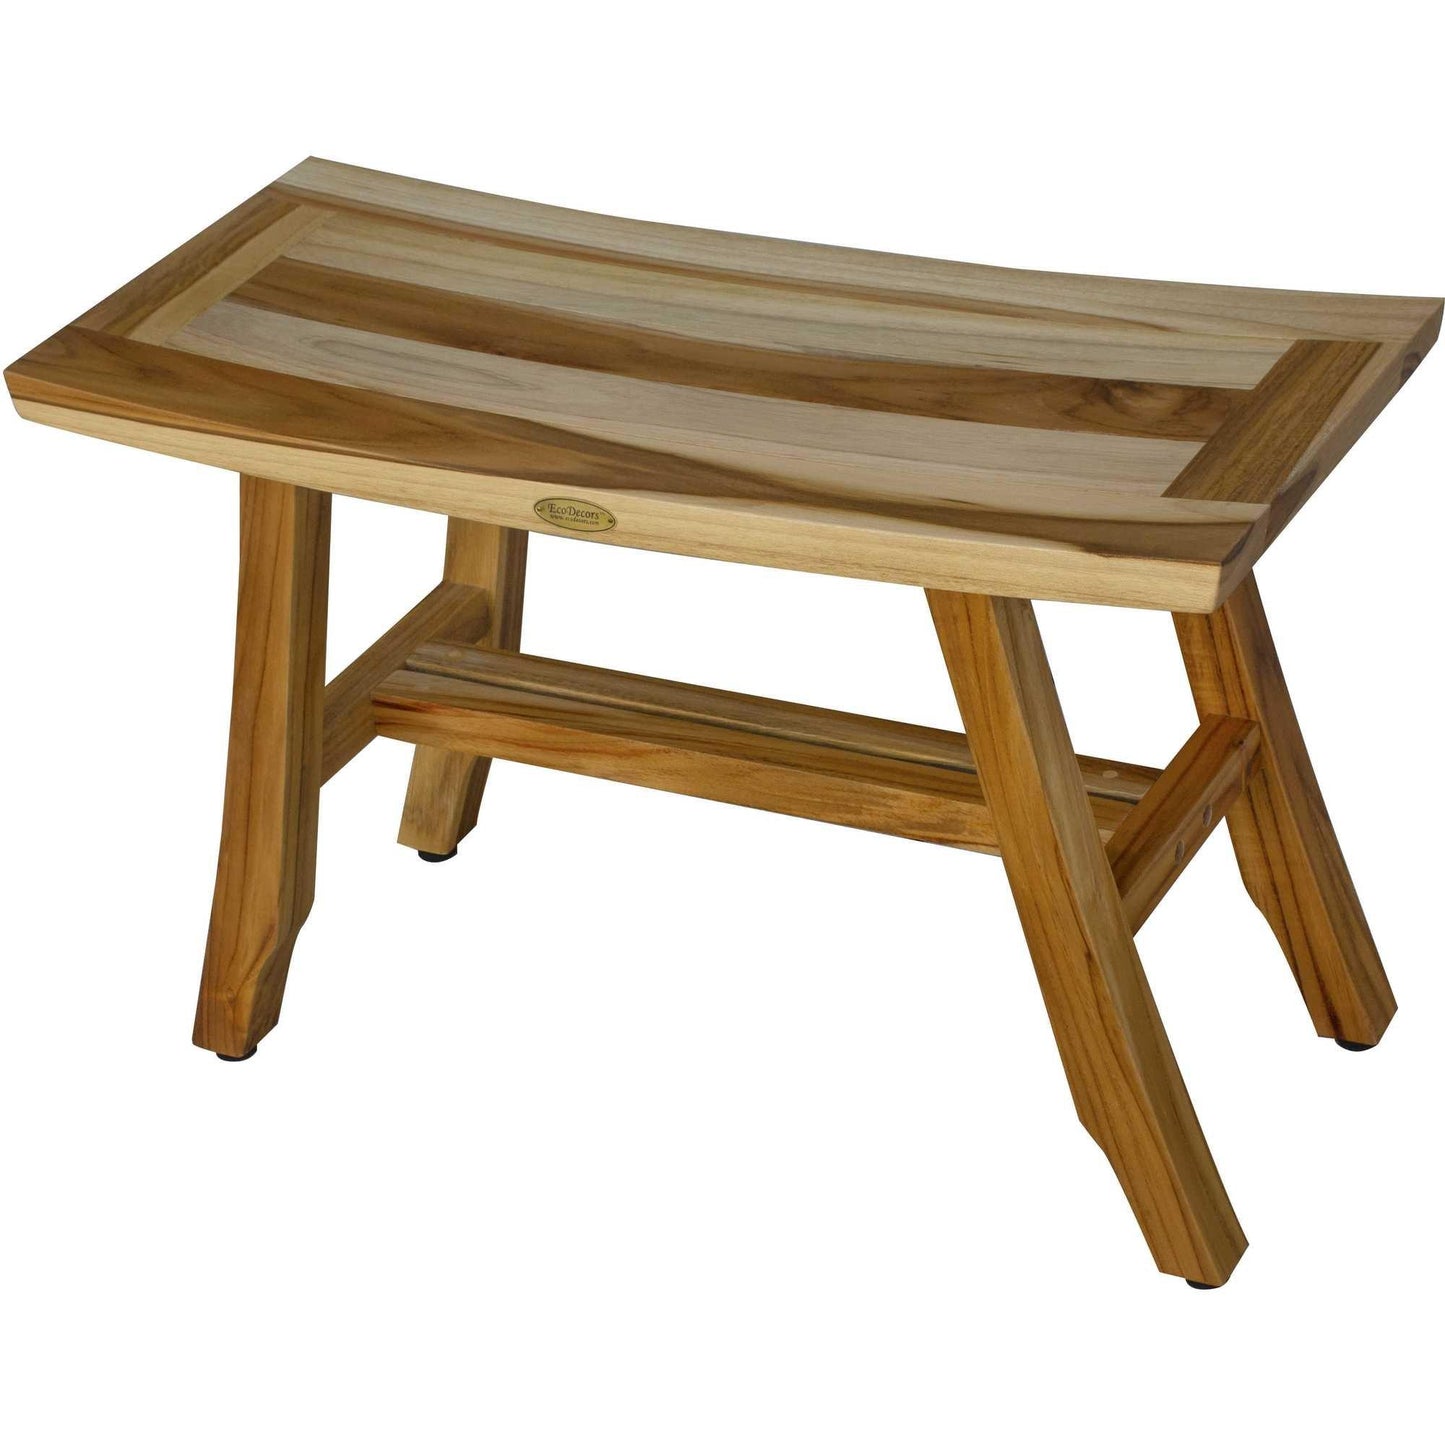 Contemporary Teak Shower Bench in Natural Finish - AFS